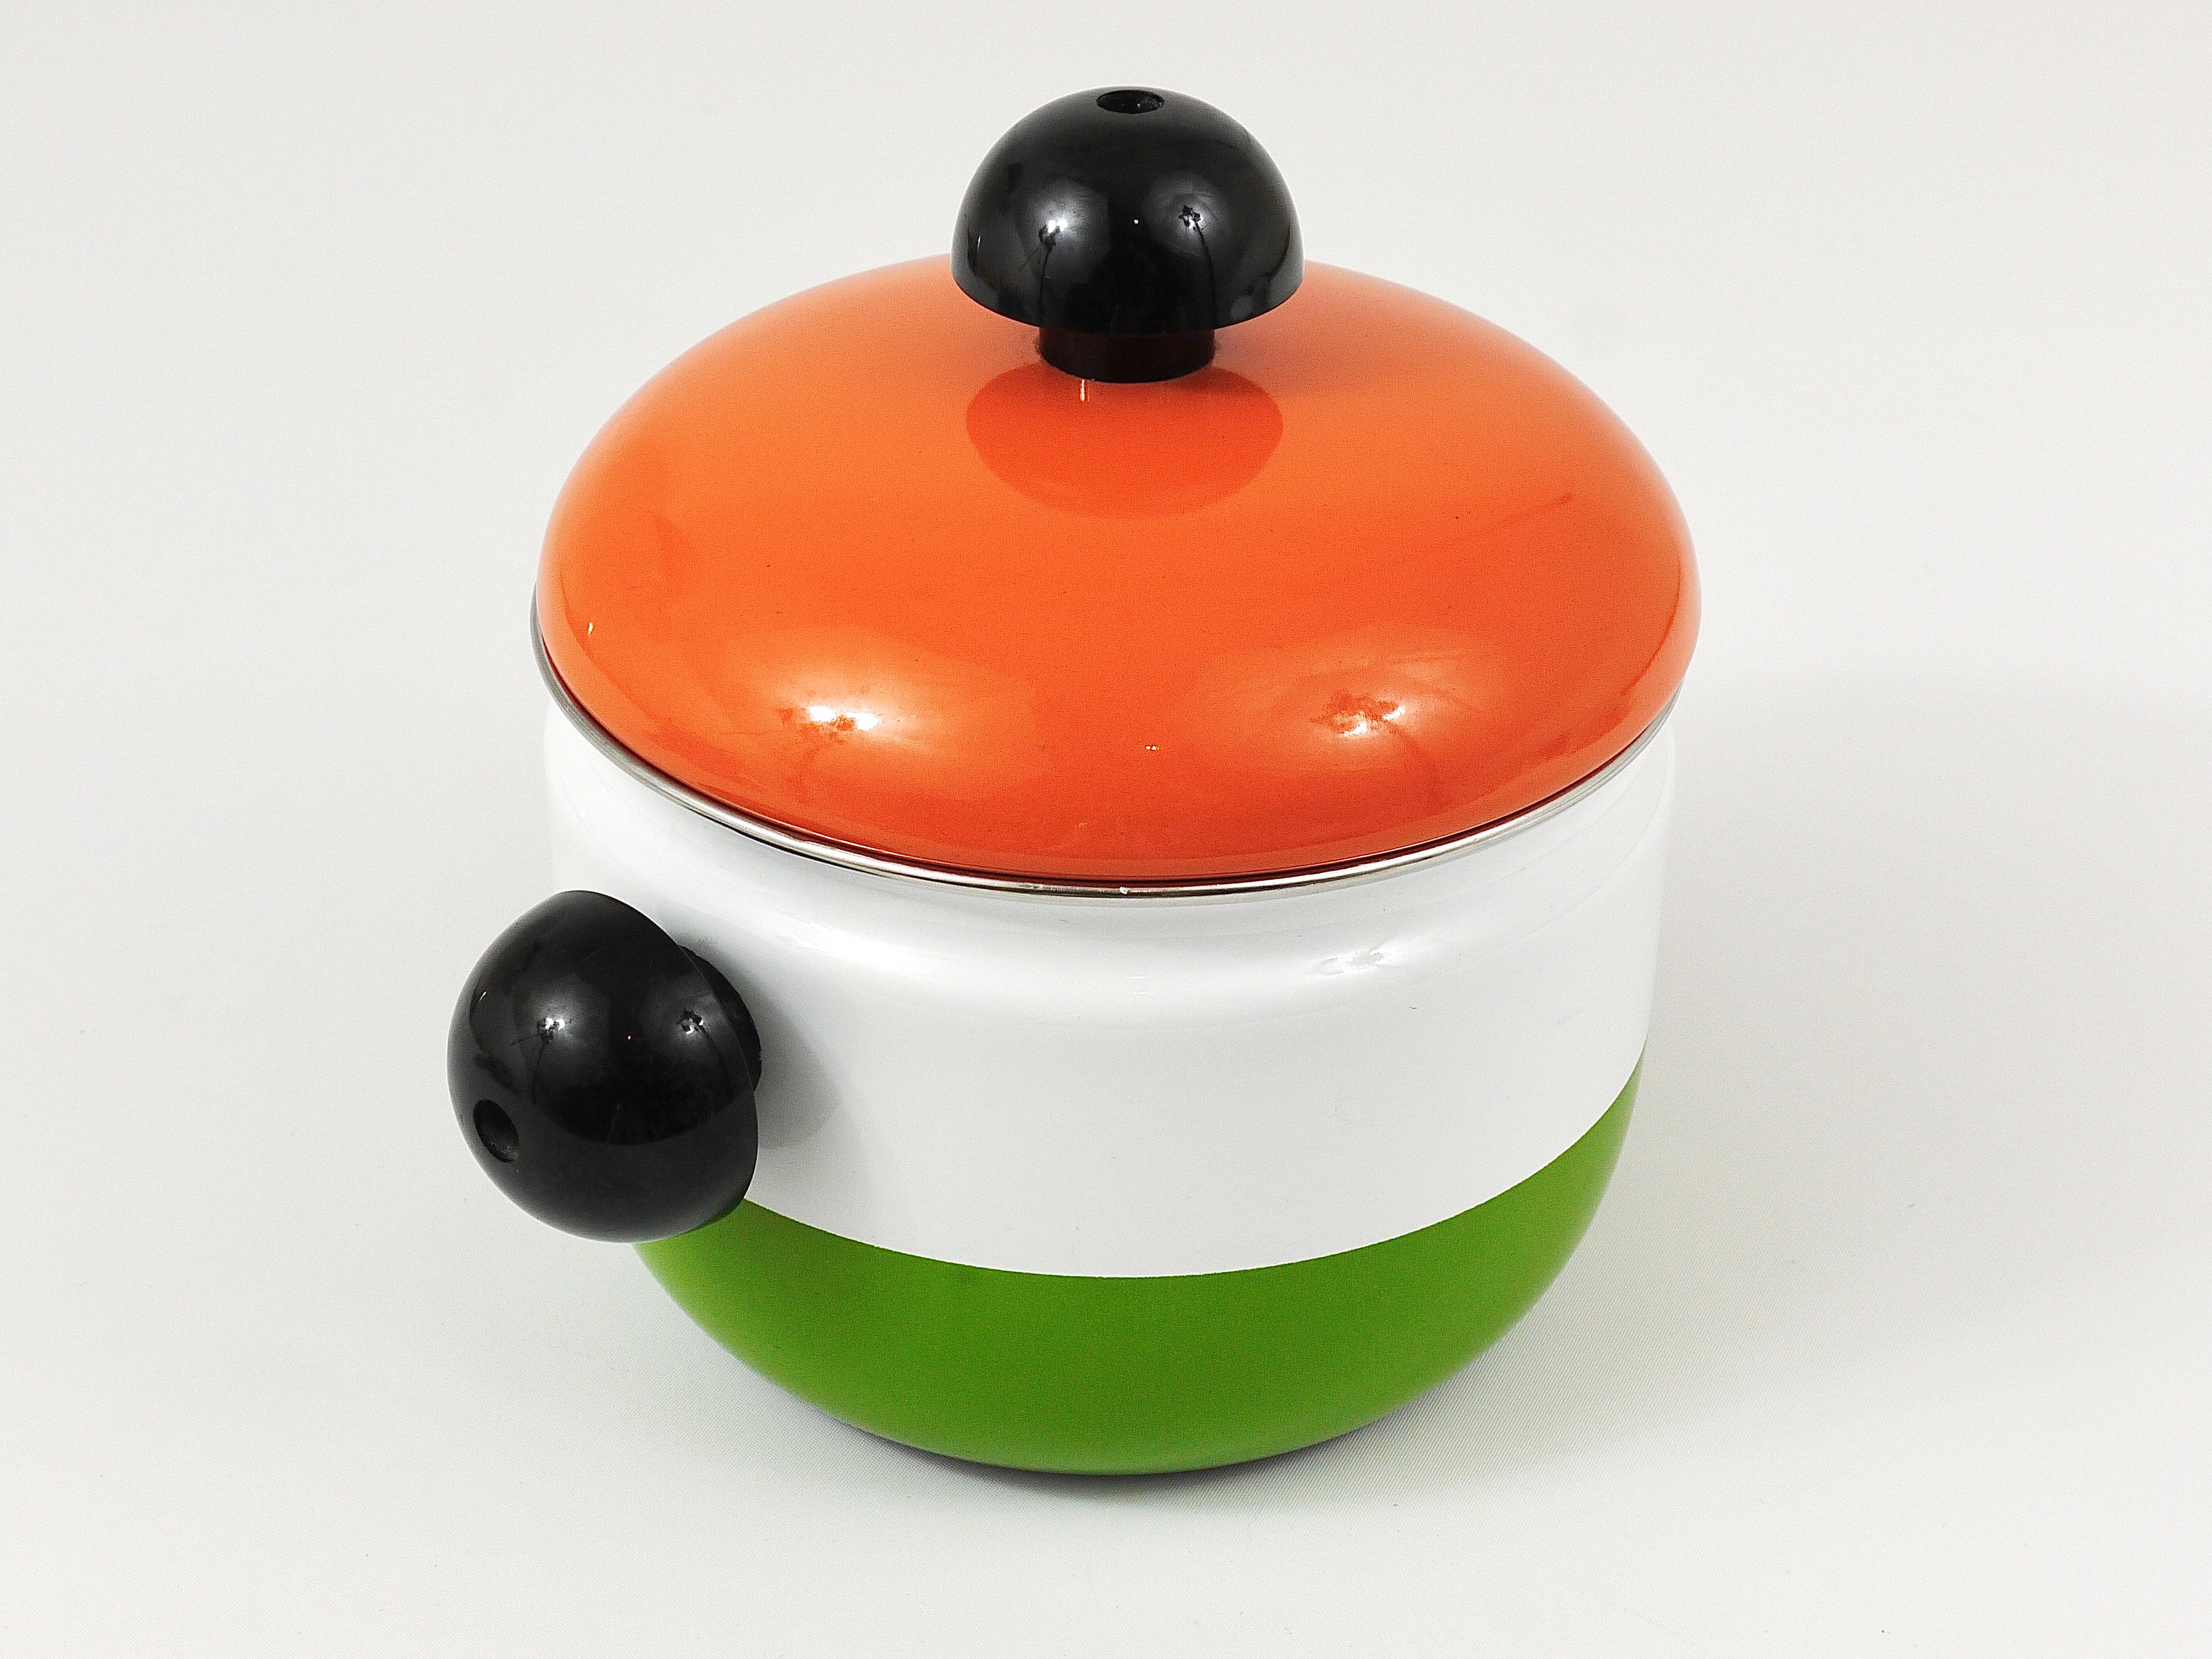 Carl Aubock Enameled Pot with Lid by Riess, Orange, White, Green, Austria, 1970s For Sale 5